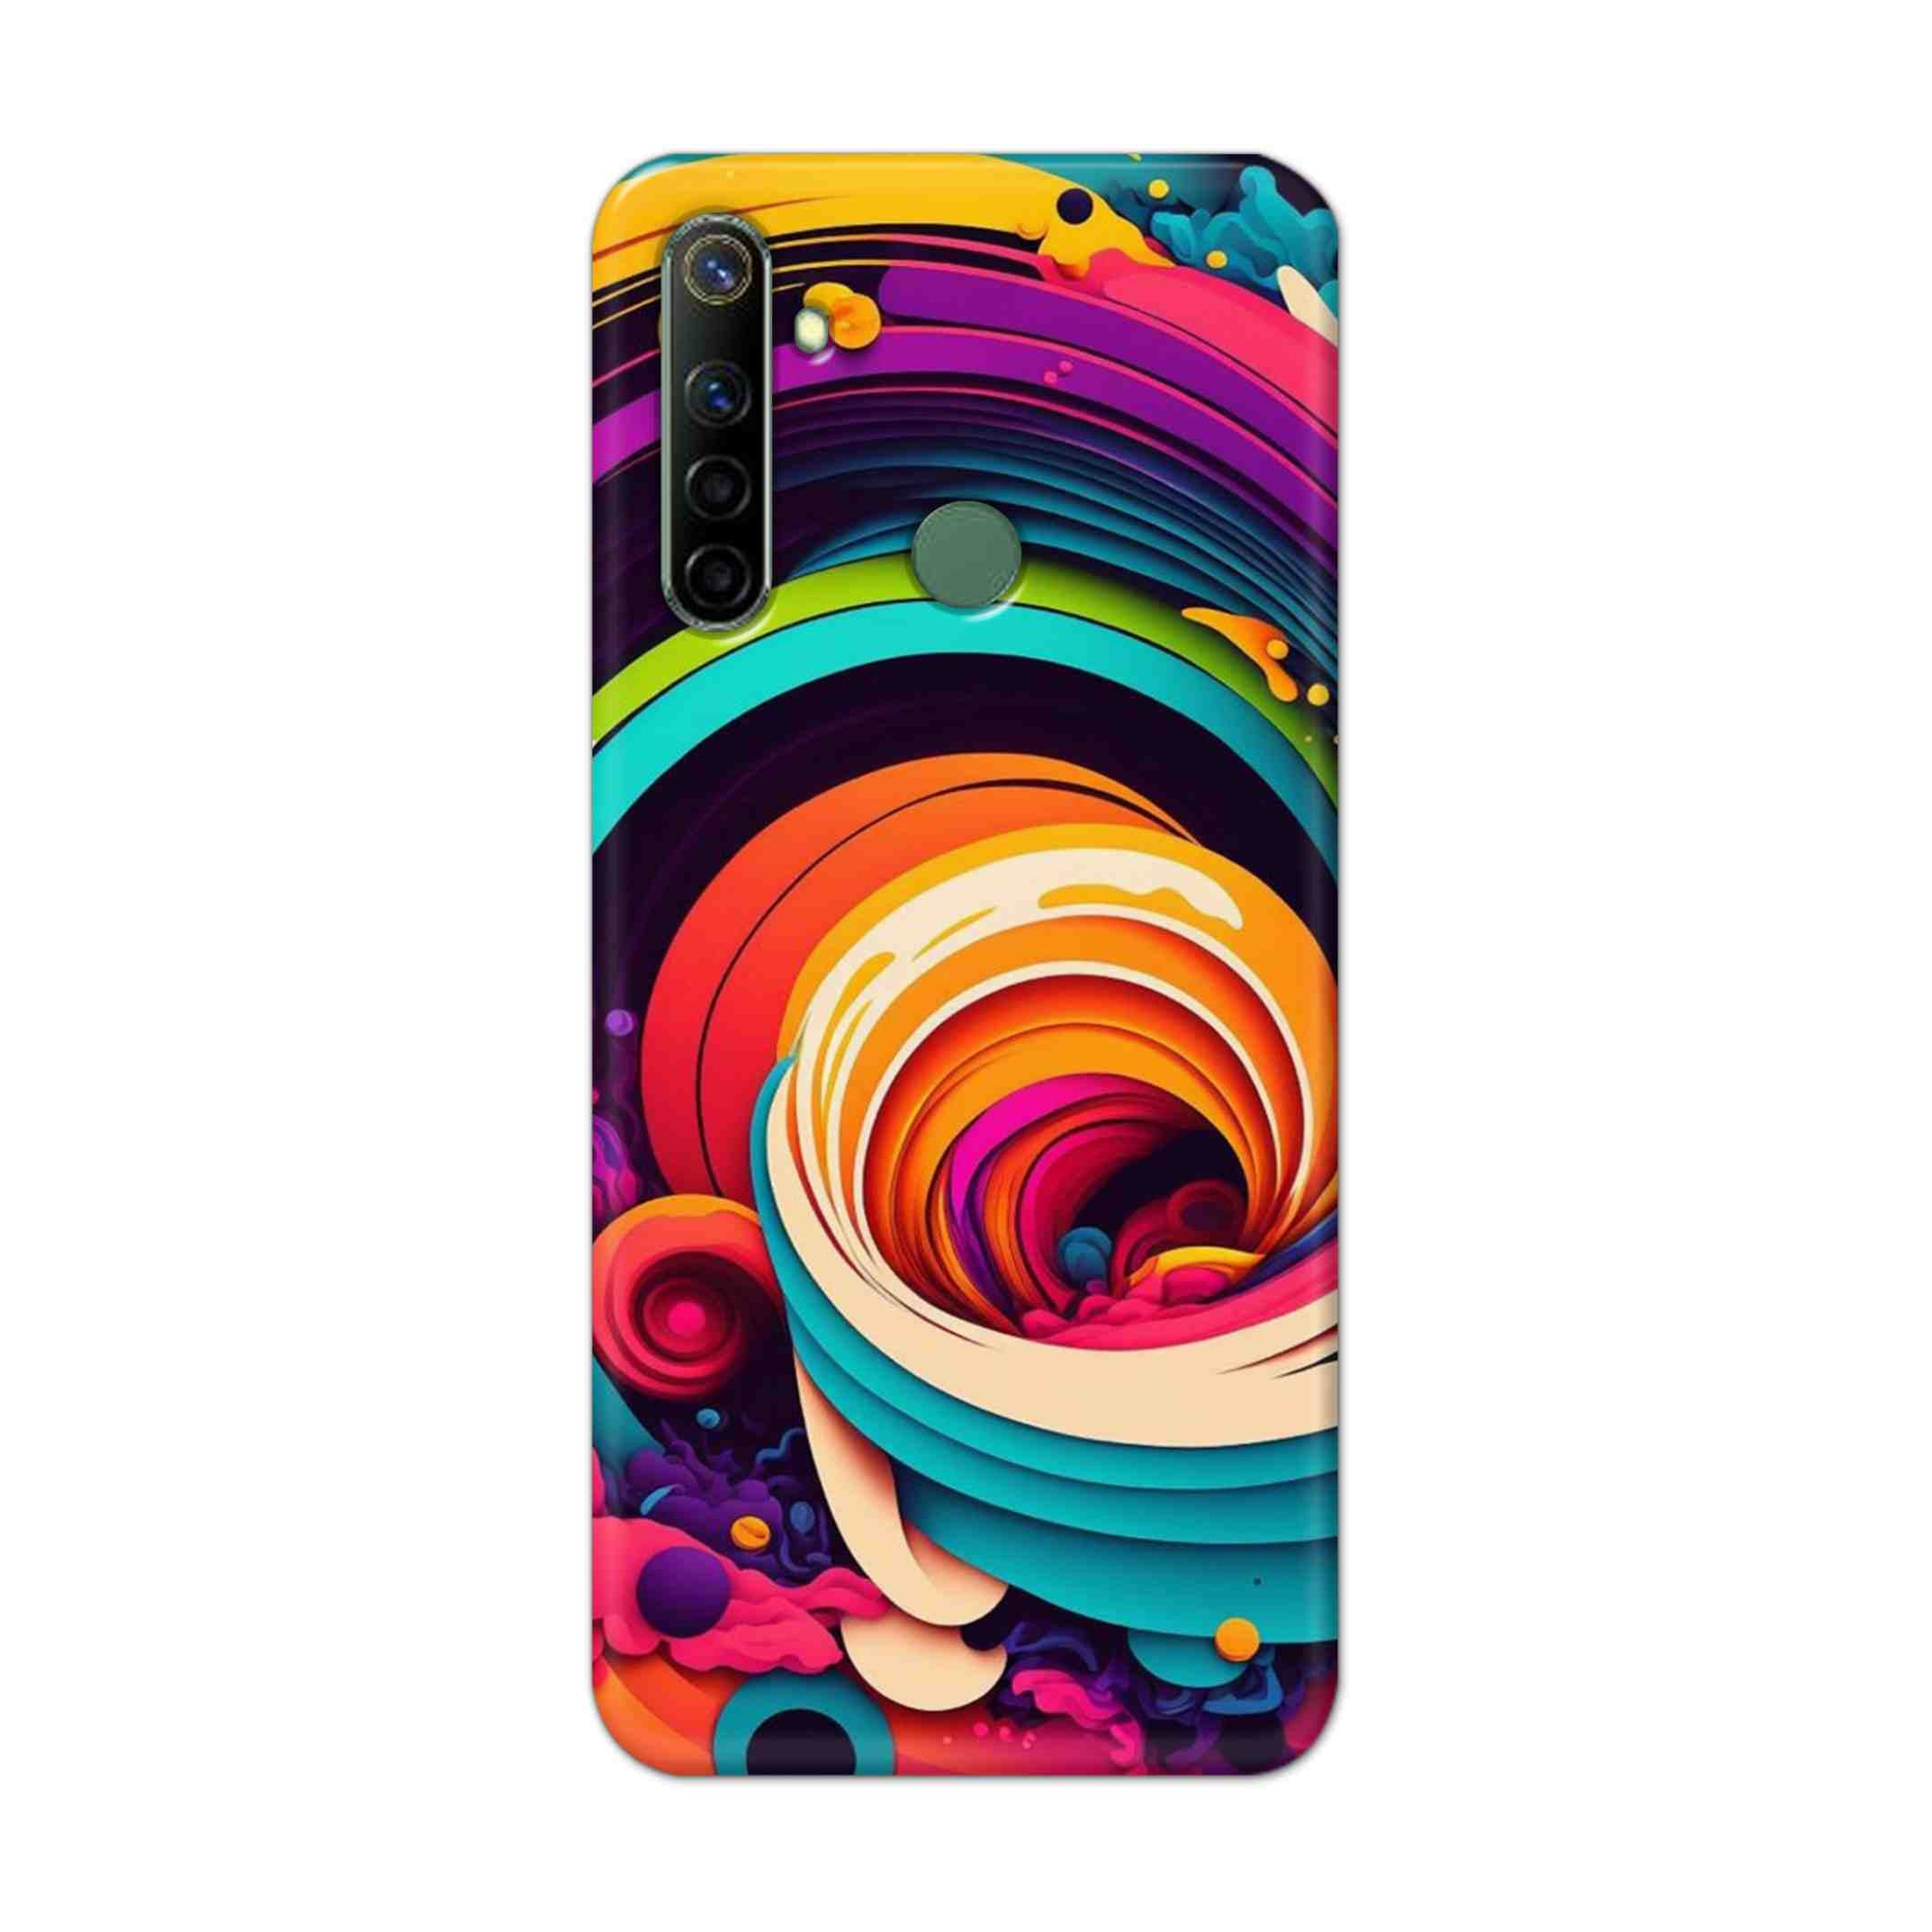 Buy Colour Circle Hard Back Mobile Phone Case Cover For Realme Narzo 10a Online